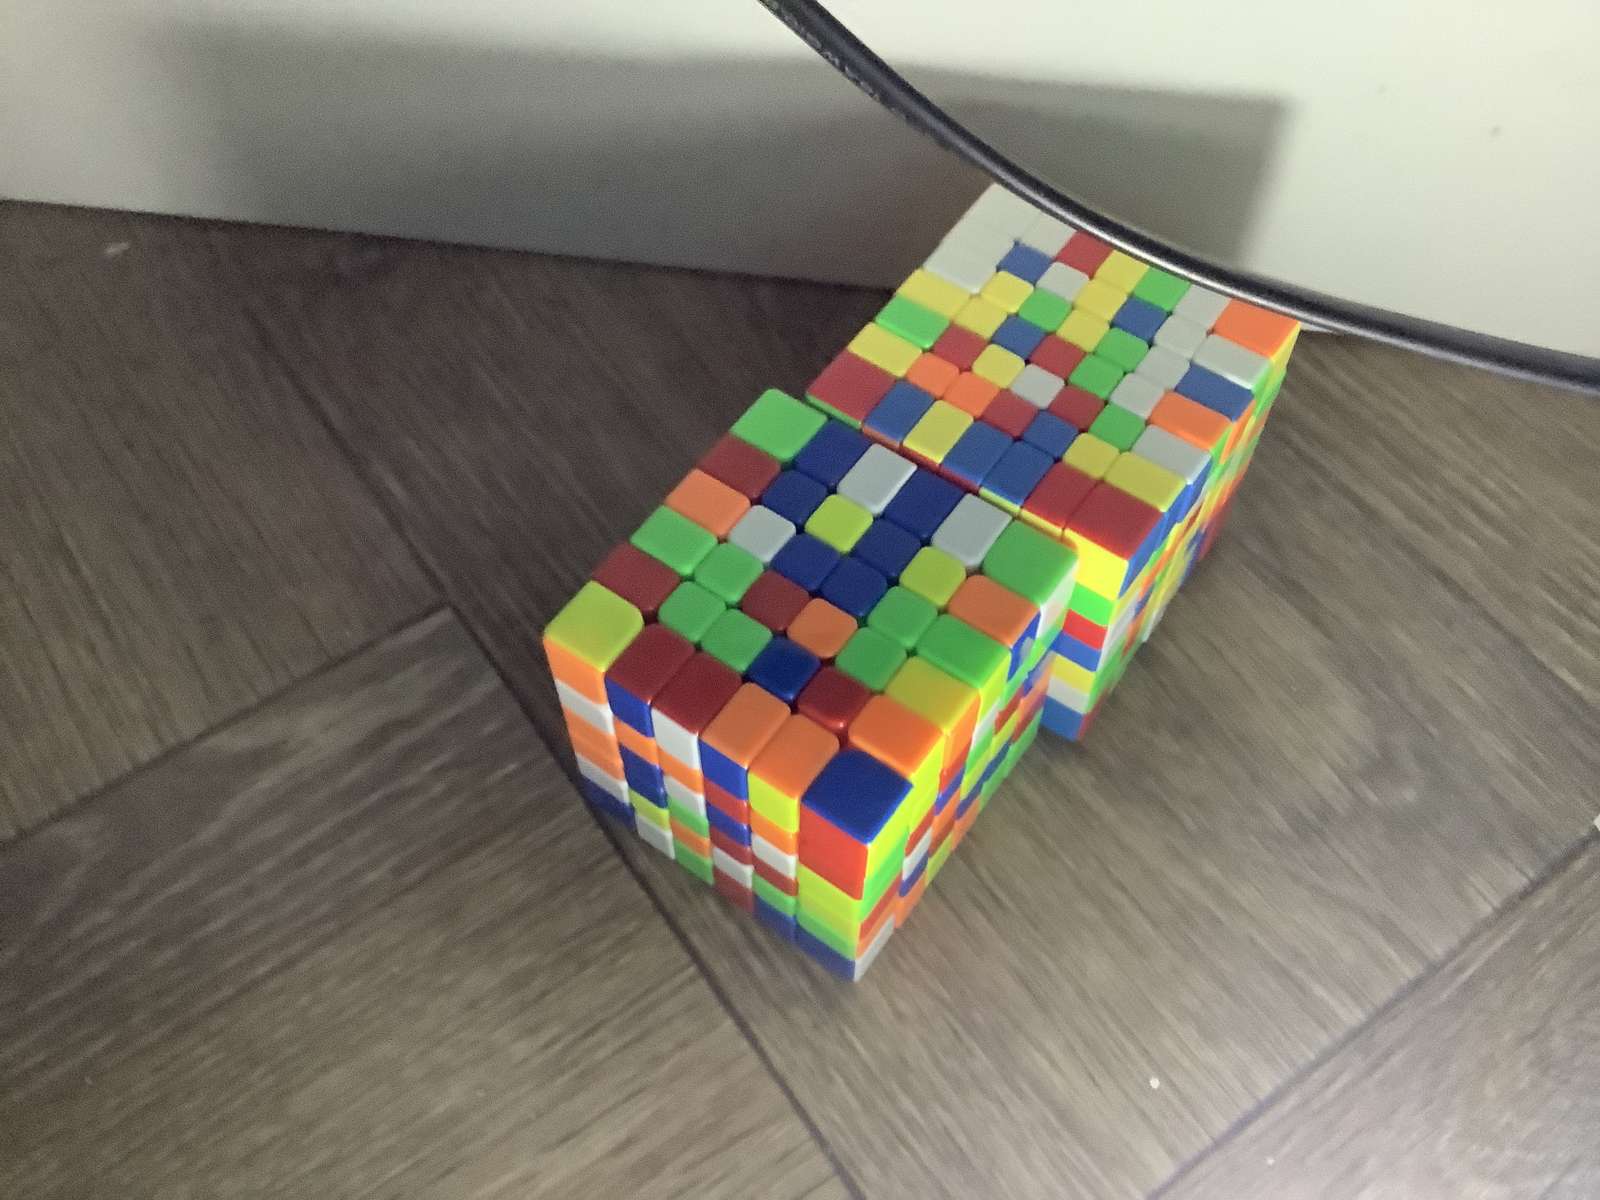 My scrambled 6x6 and 7x7 puzzle online from photo